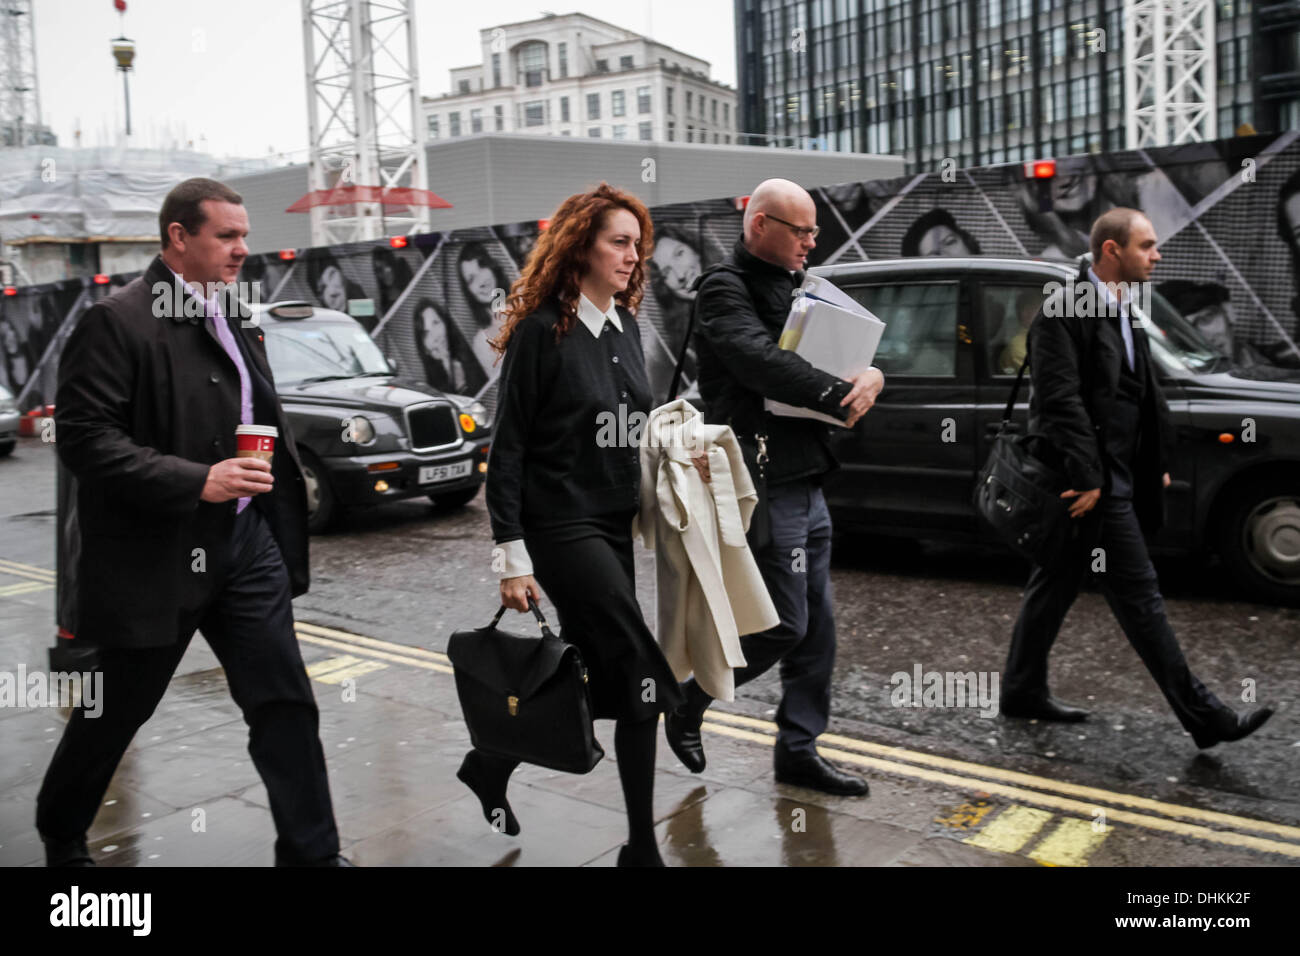 London, UK. 12th November 2013. Rebekah Brooks and Andy Coulson trial continues at Old Bailey in London Credit:  Guy Corbishley/Alamy Live News Stock Photo